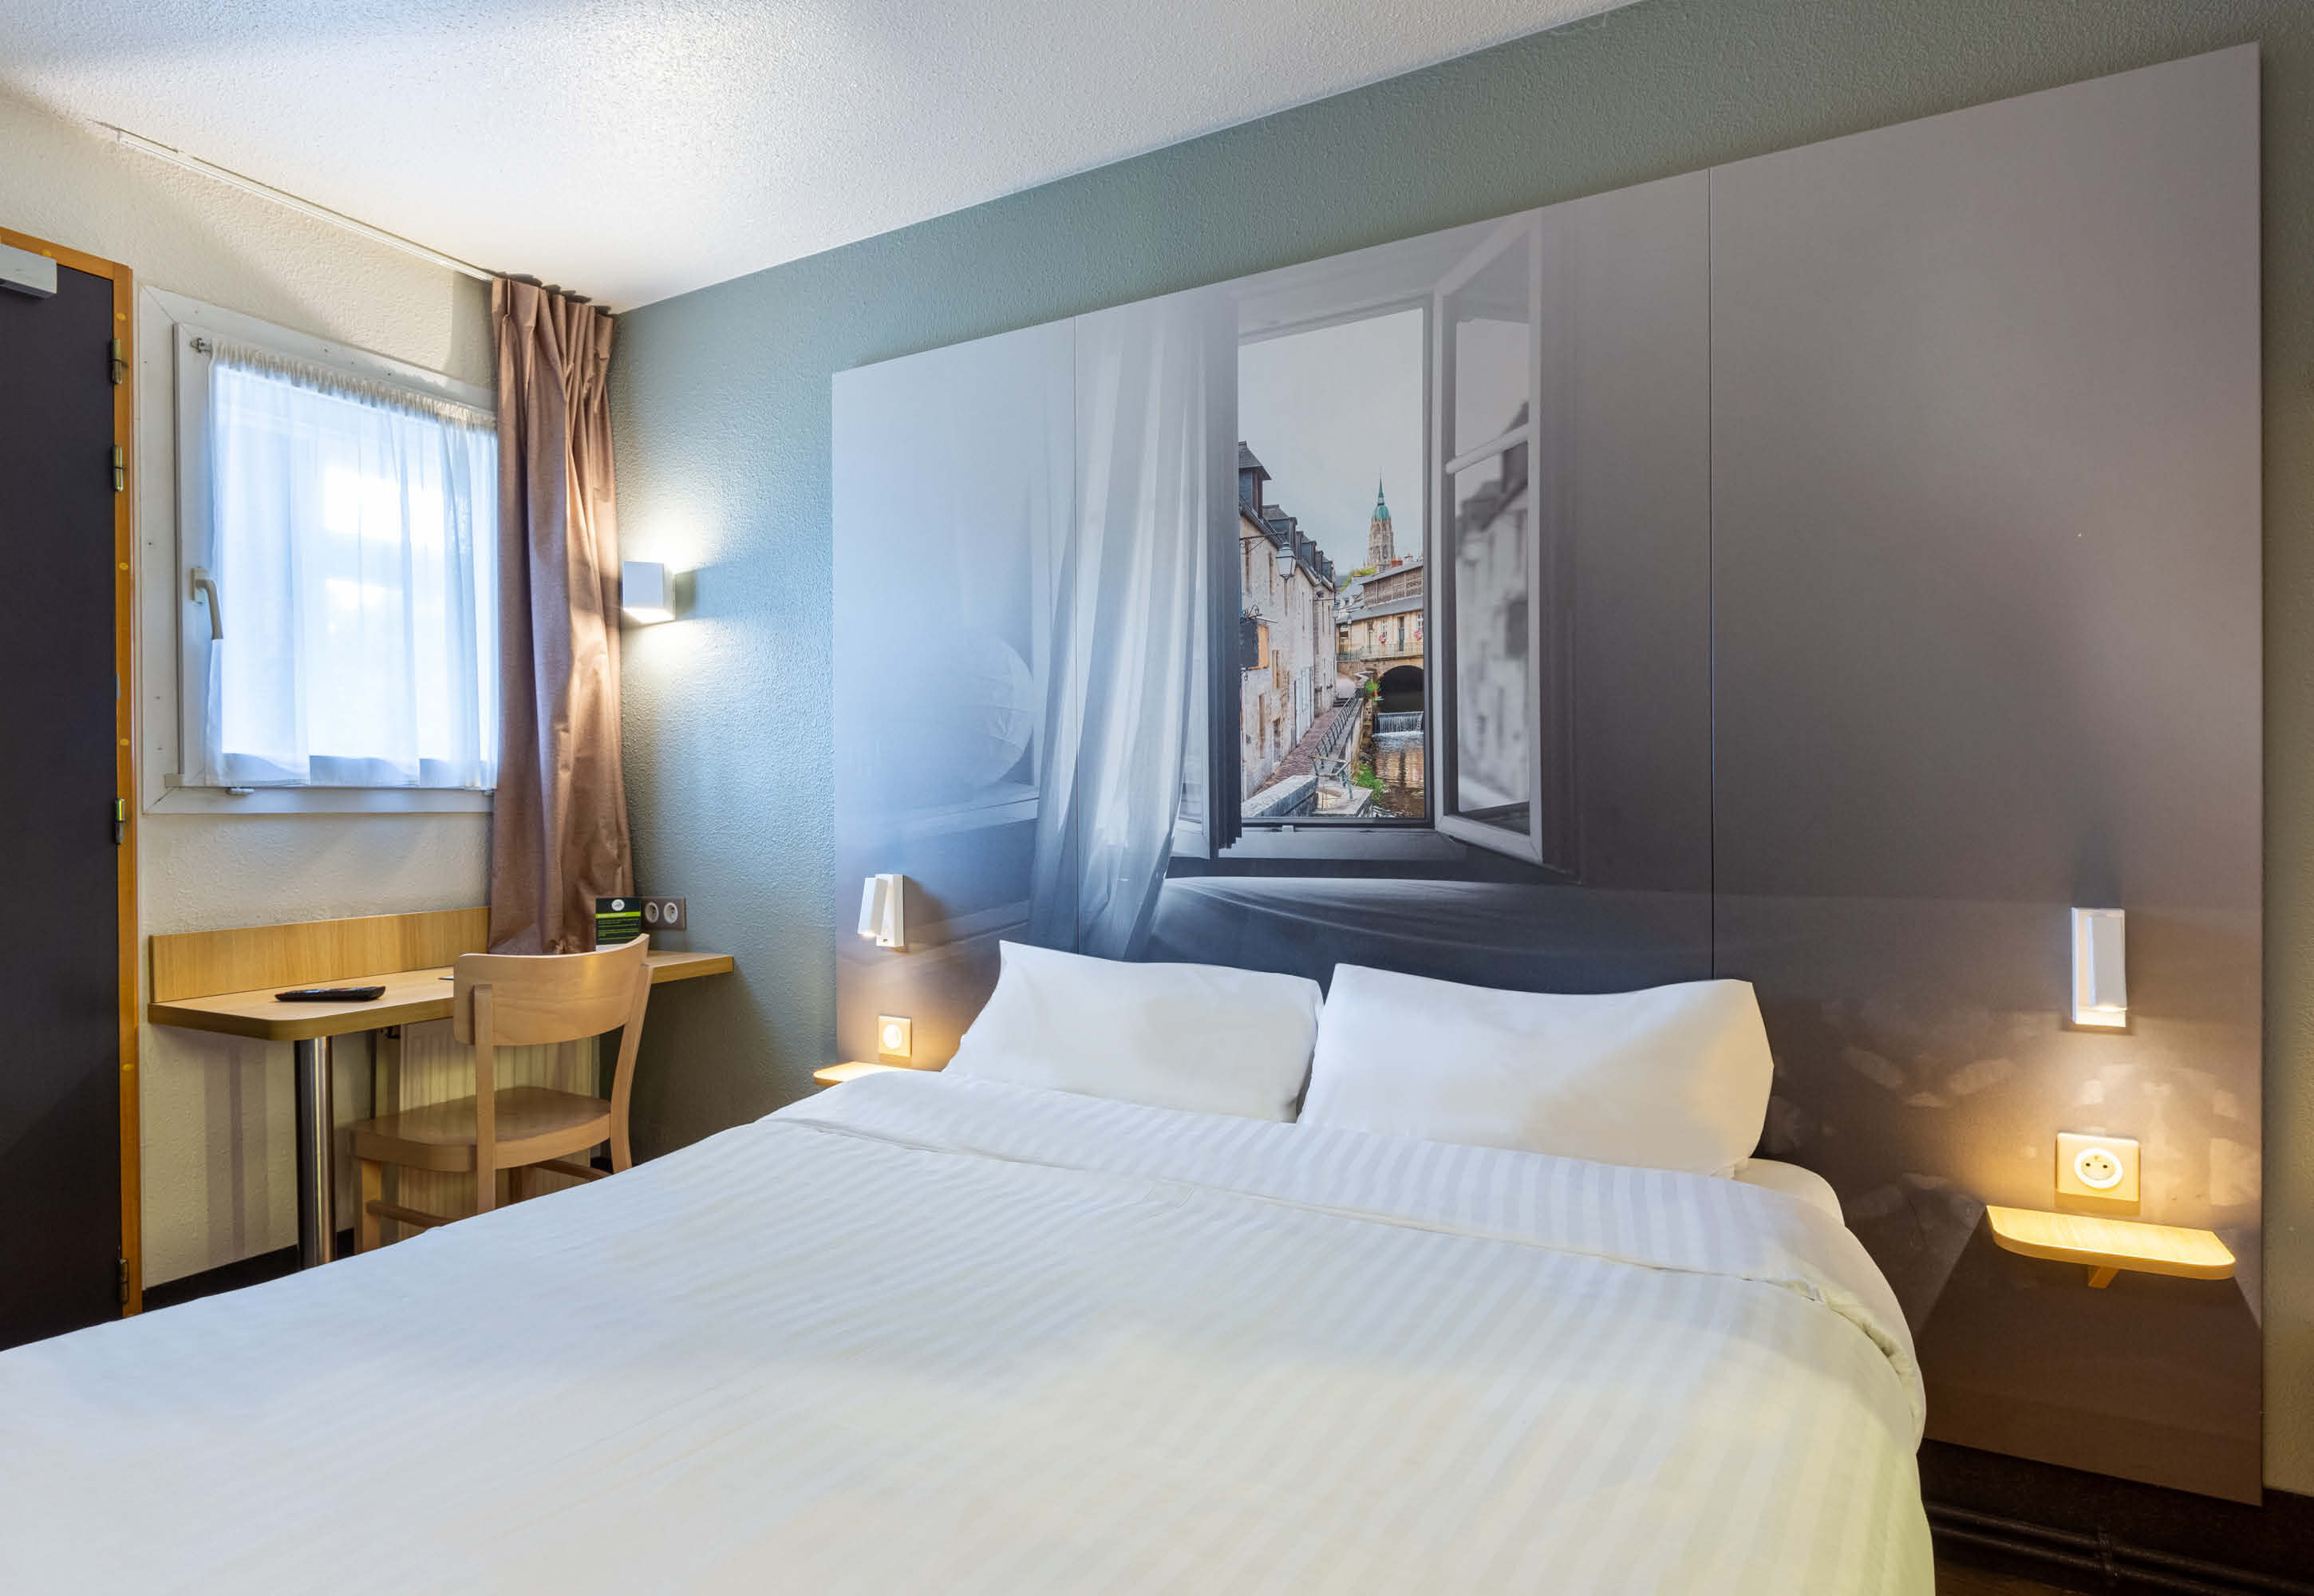 Images B&B HOTEL Chartres Le Forum